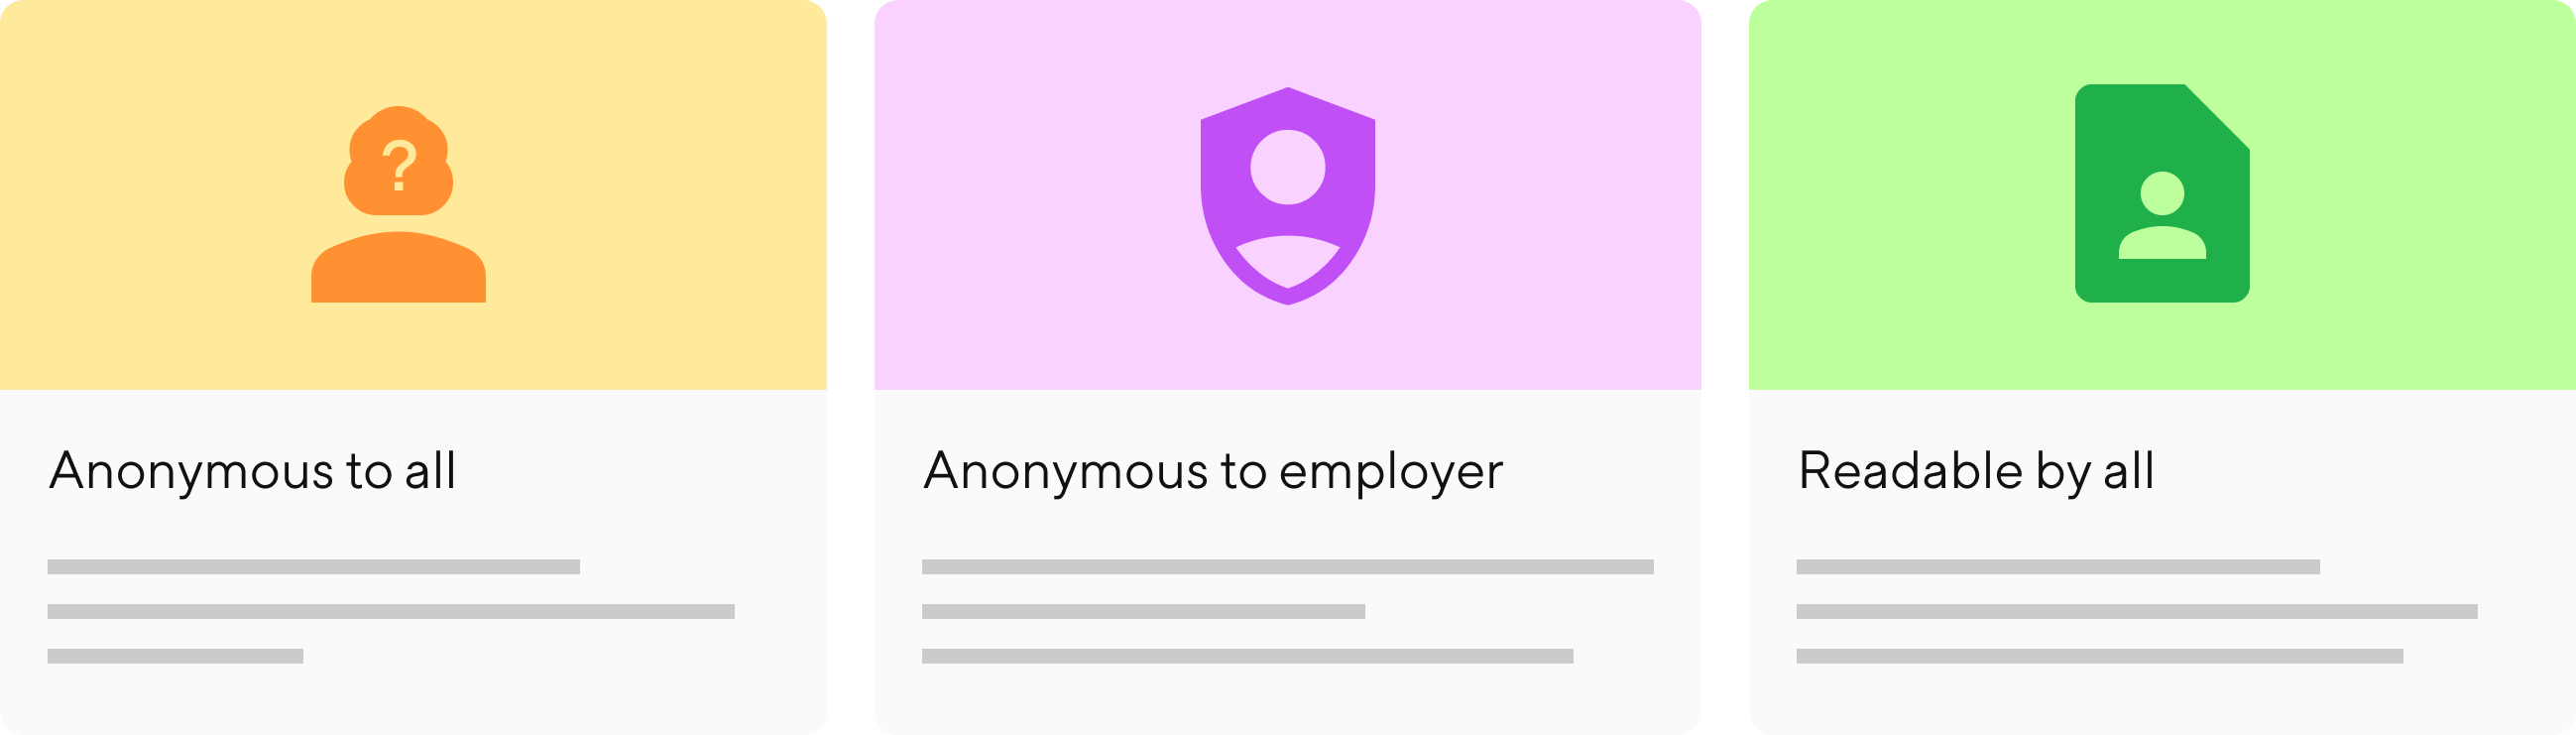 Example of three different privacy levels of a self-ID campaign: anonymous to all, anonymous to employer, and readable by all.